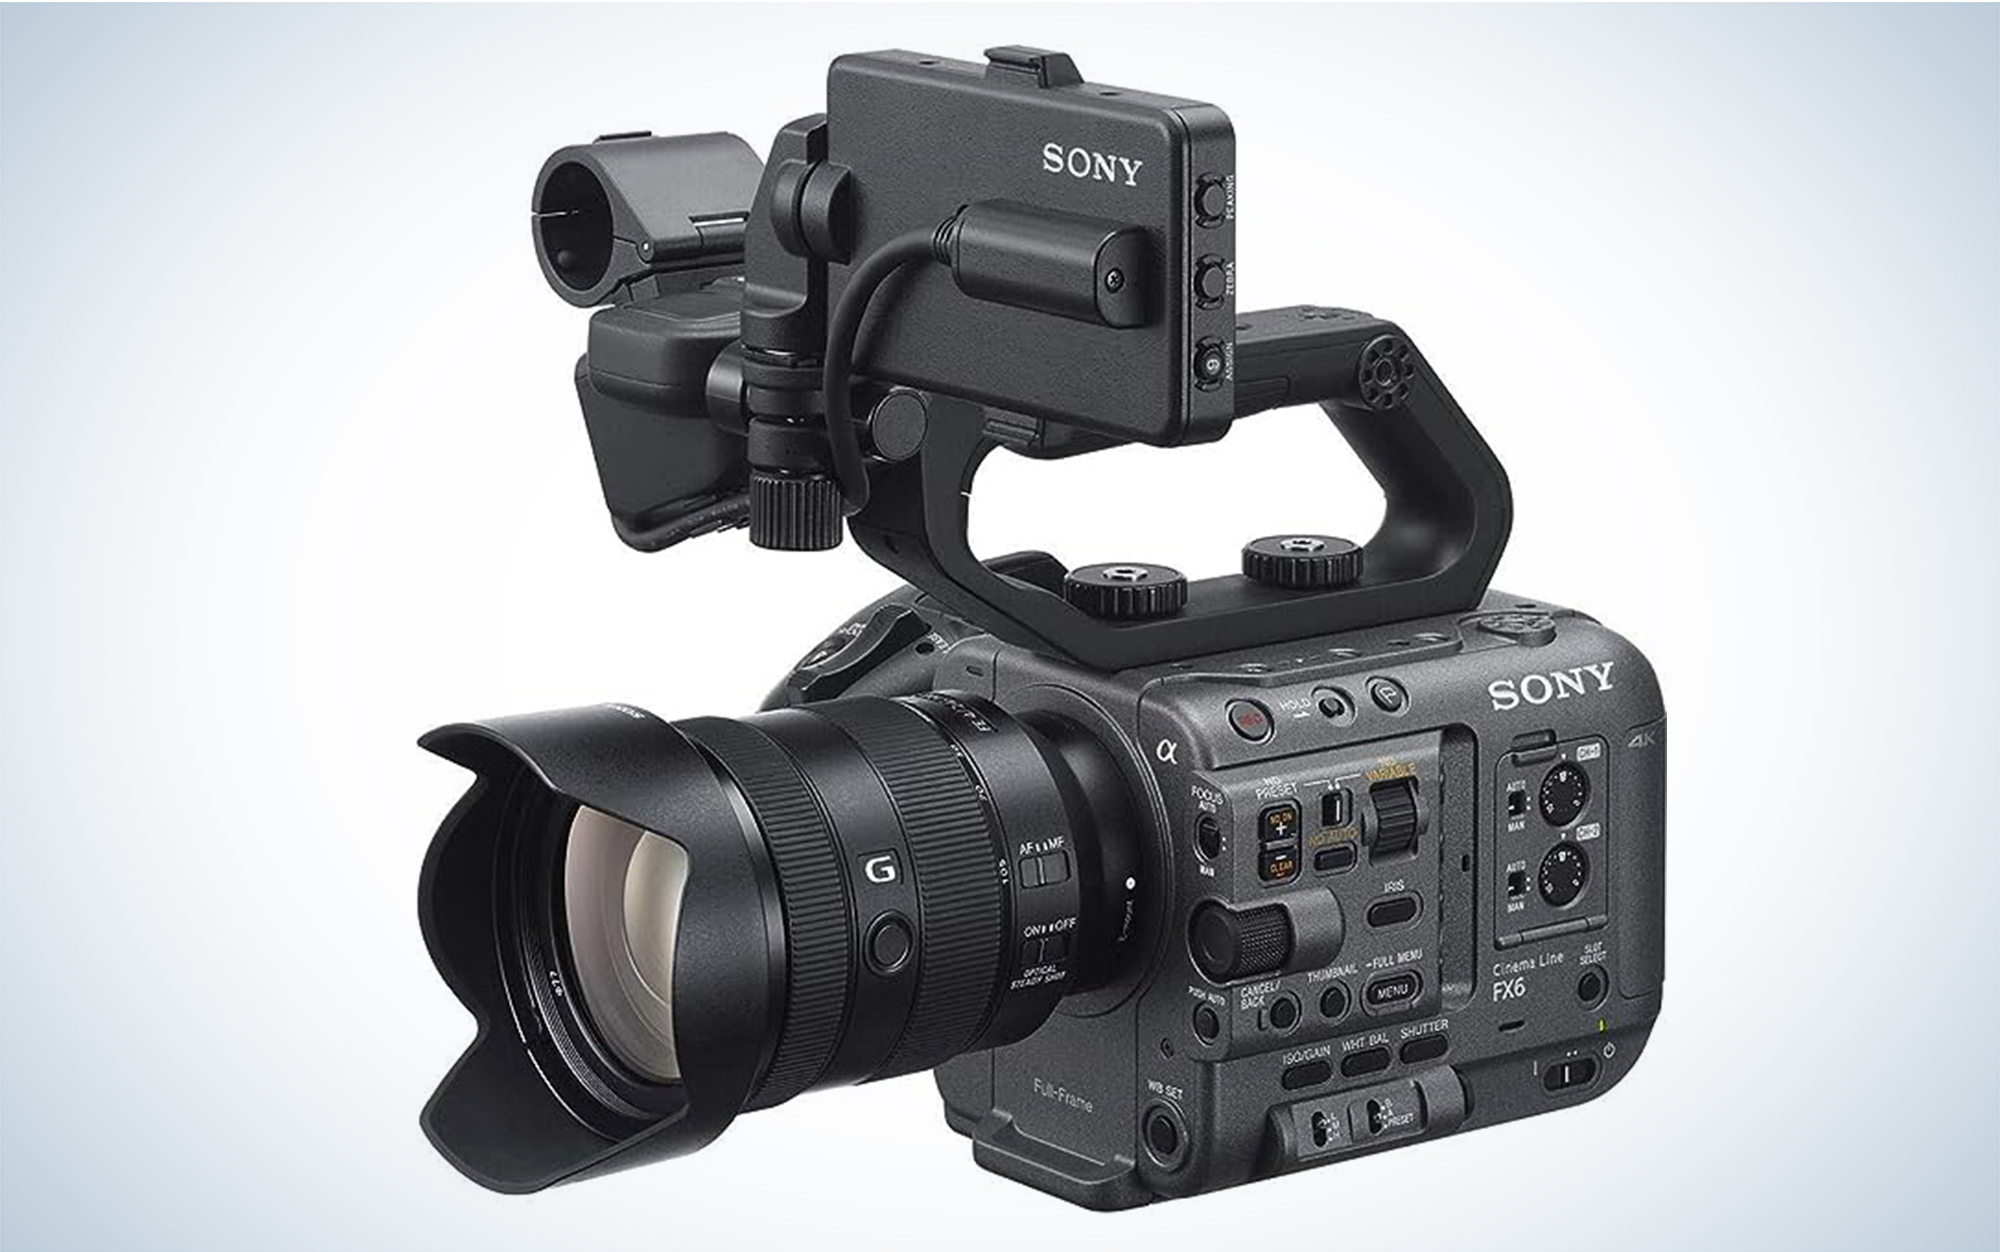 The Sony FX6 is one of the best cameras for filming hunts.